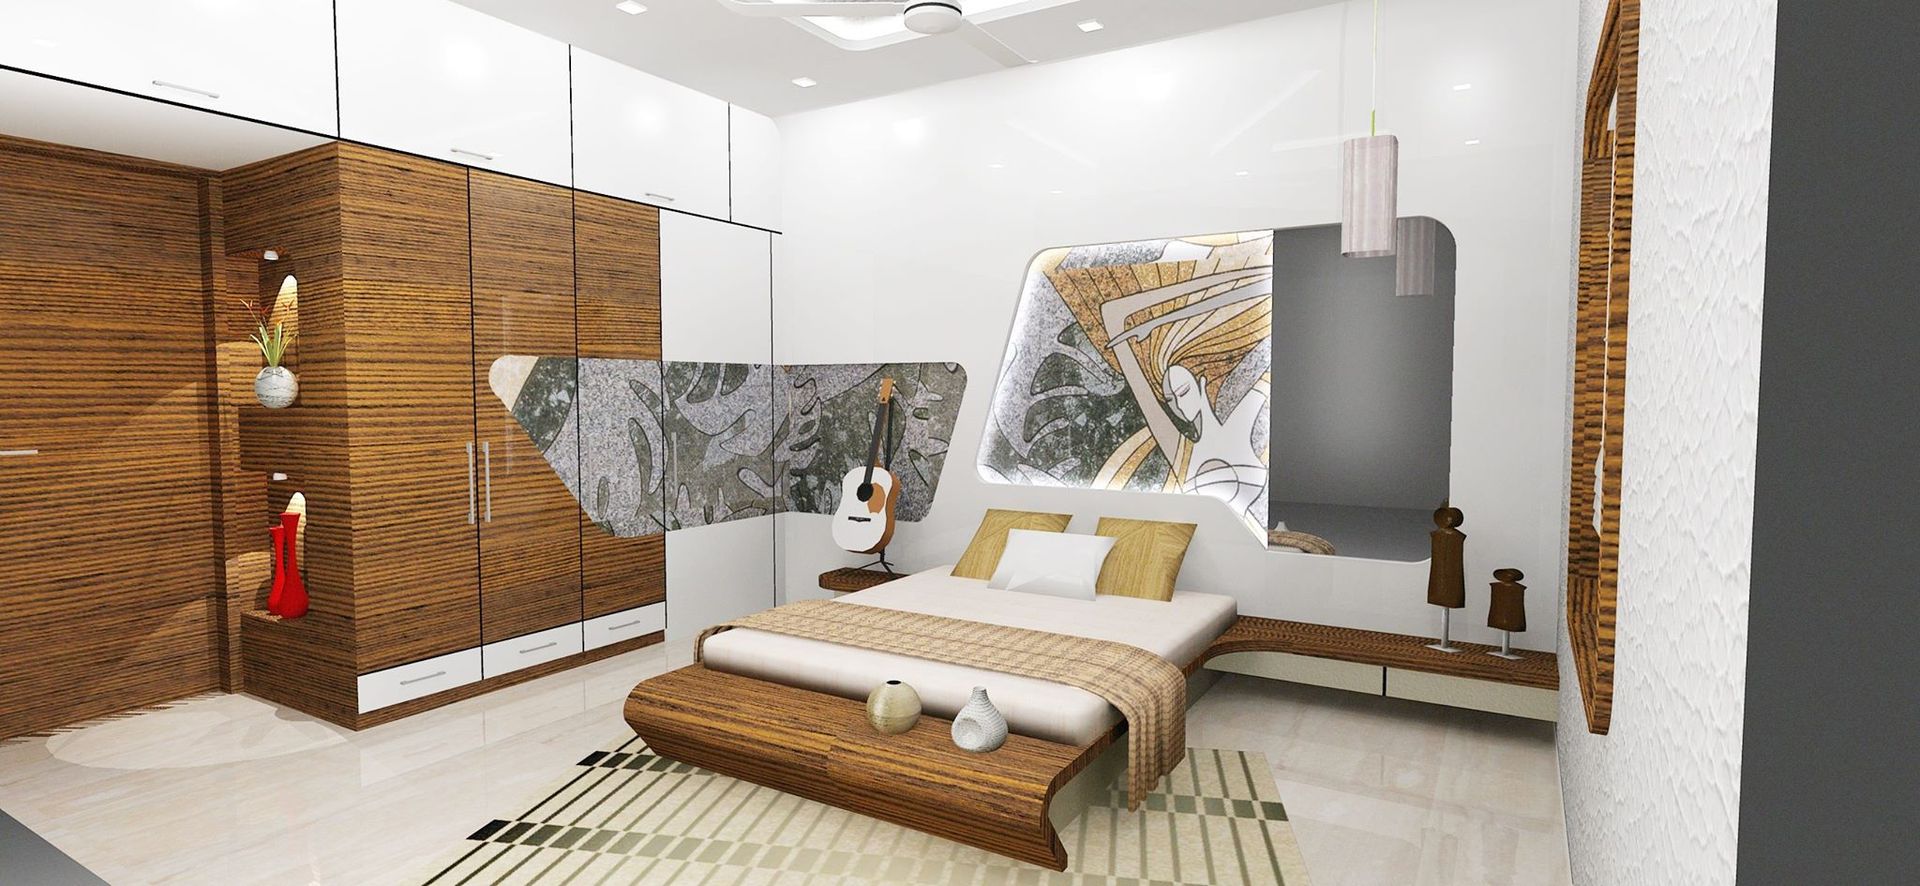 Bedroom Designs, Archsmith project consultant Archsmith project consultant Moderne Schlafzimmer